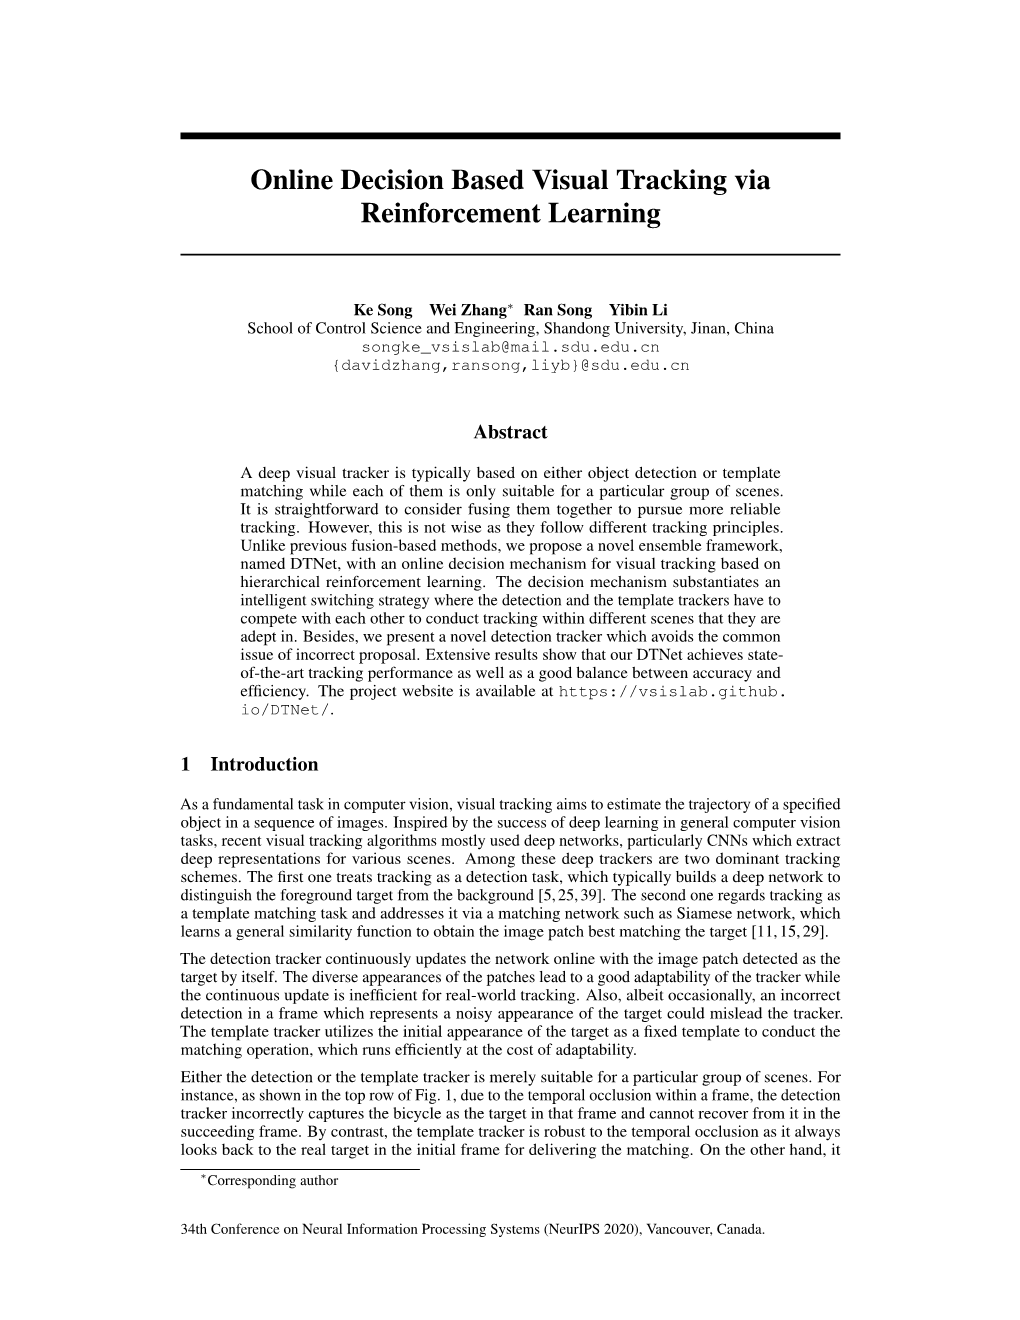 Online Decision Based Visual Tracking Via Reinforcement Learning